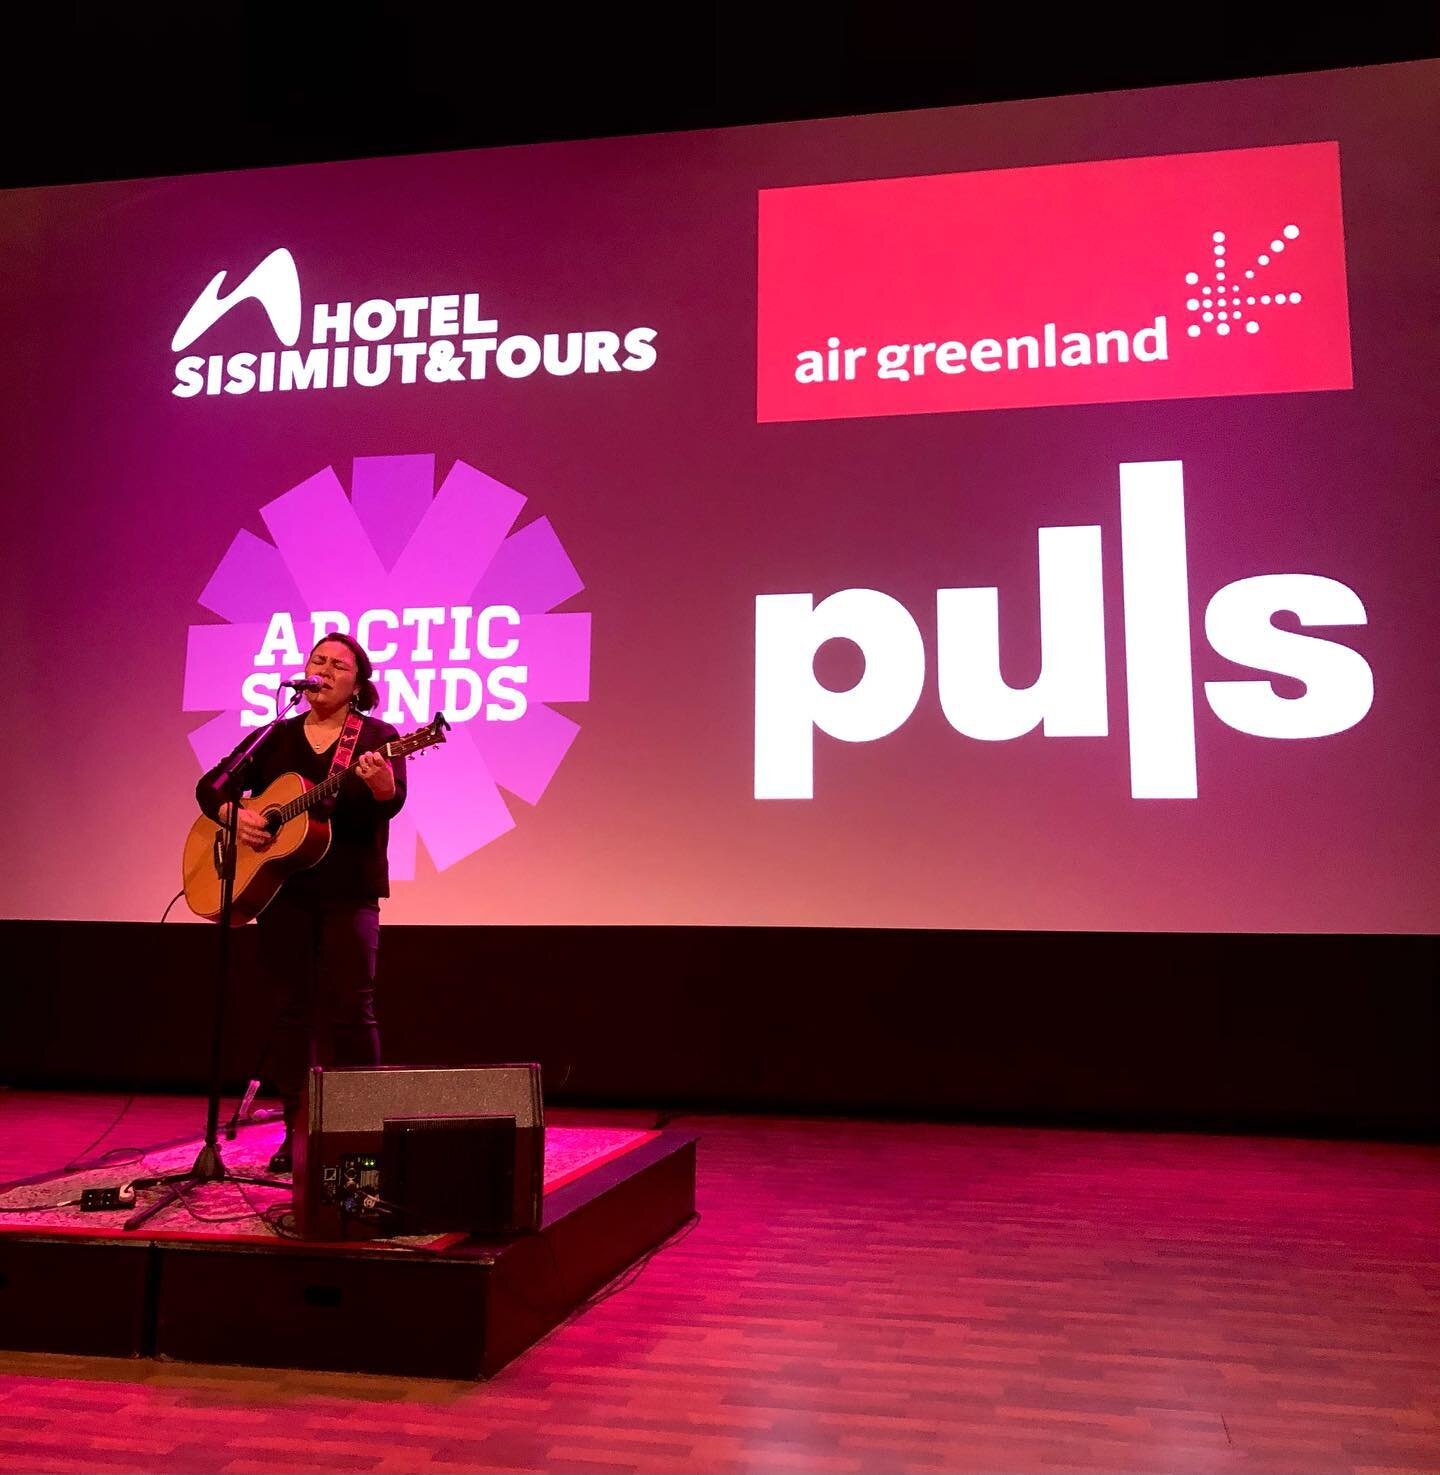 @nina_k_j soundcheck in @taseralik. Almost ready for tonight. Doors open at 7:30 pm 💜 
@air_greenland_official 
#puls #hotelsisimiutandtours